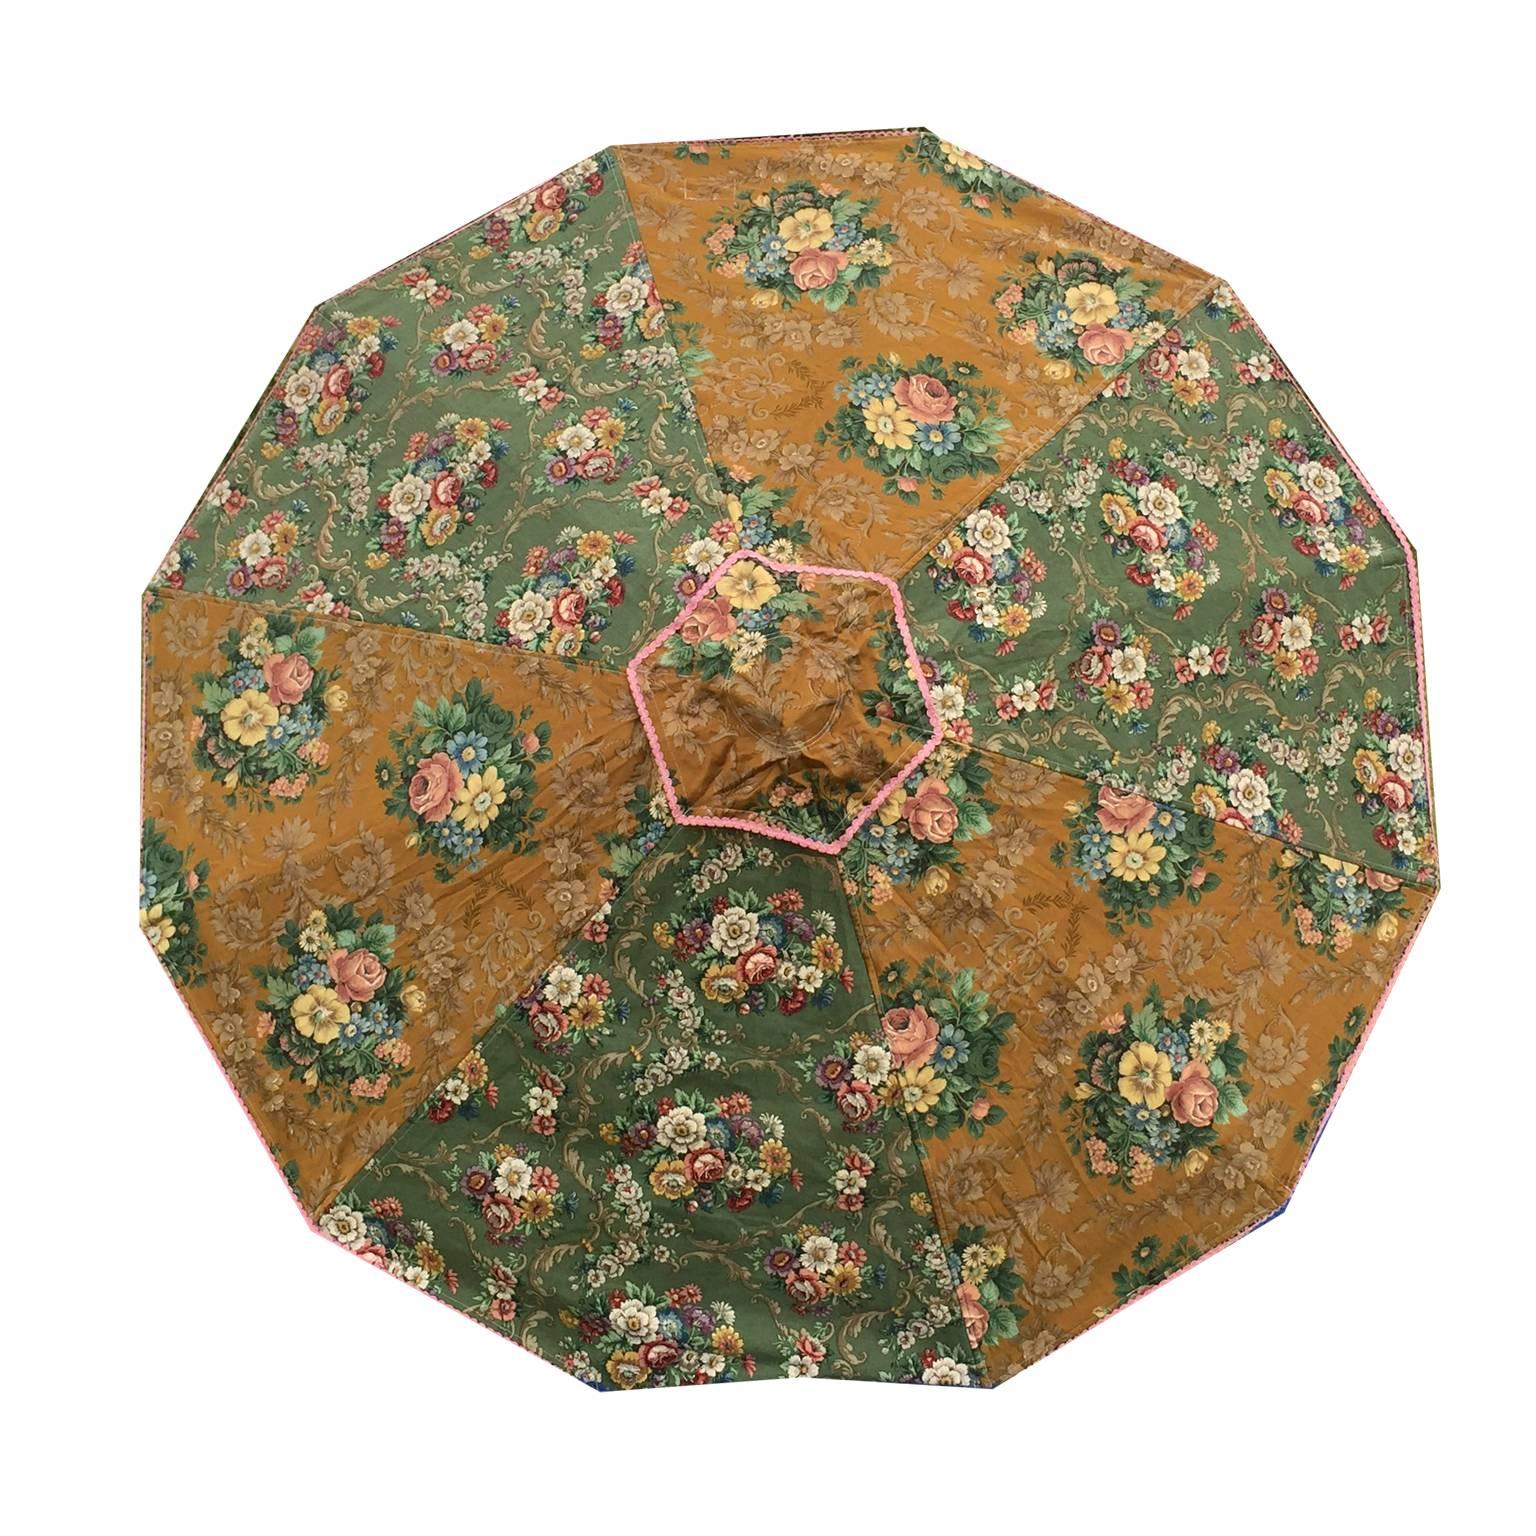 You are viewing 'Bawa' one of Sunbeam Jackie's iconic sun umbrellas. 
This patio umbrella made using a unique combination of vintage fabrics from legendary British textile houses including Designers Guild and Sanderson. See the Sunbeam Jackie